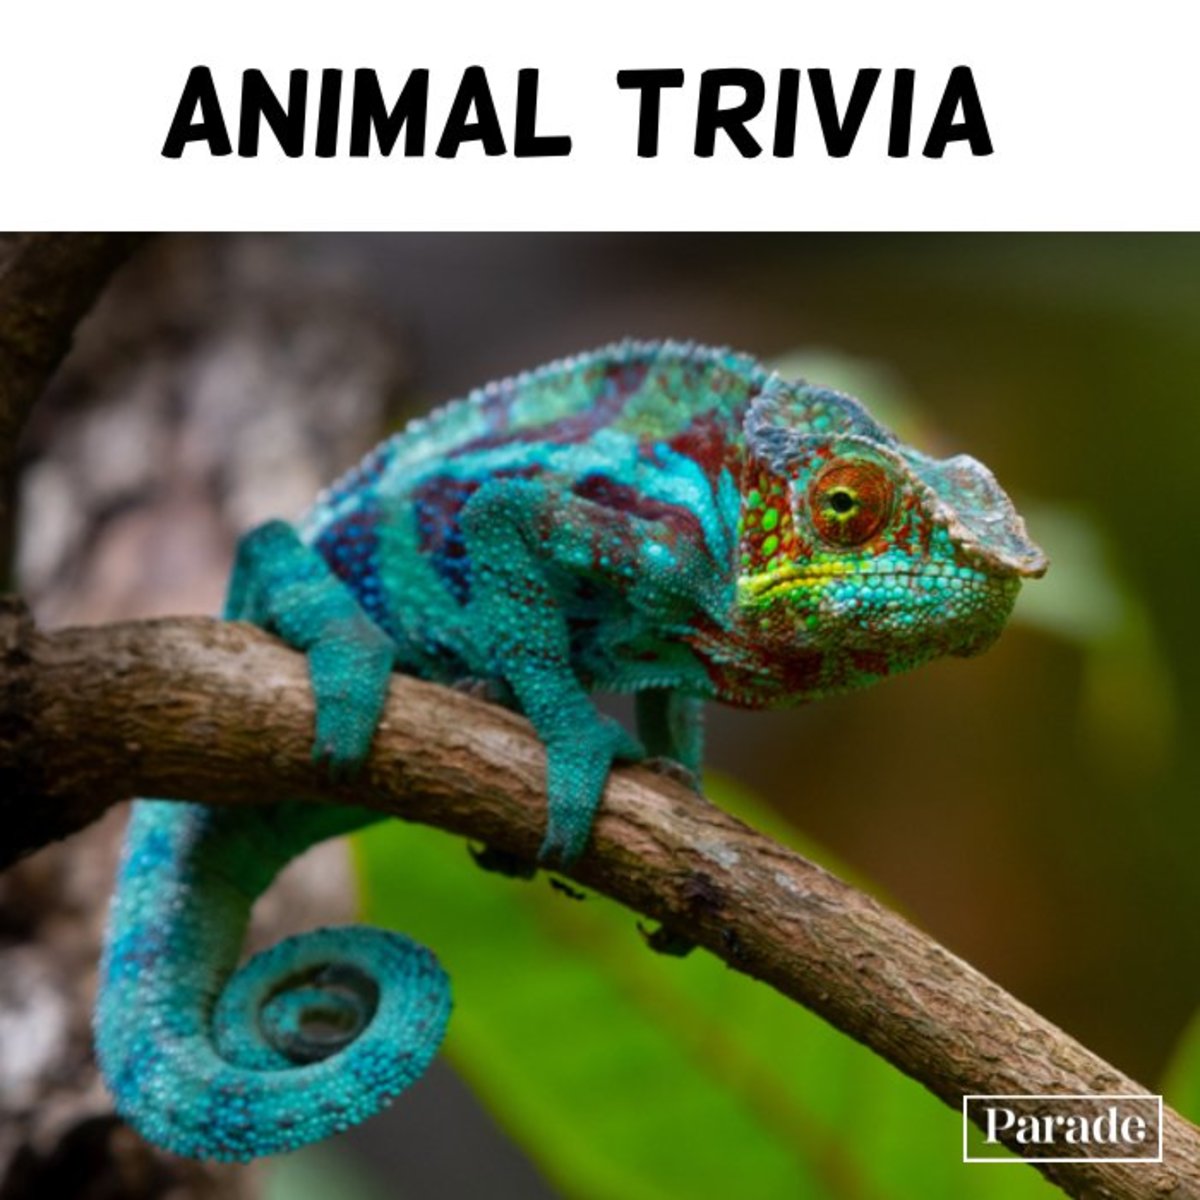 100 Animal Trivia Questions (with Answers!) For Kids & Adults - Parade Pets